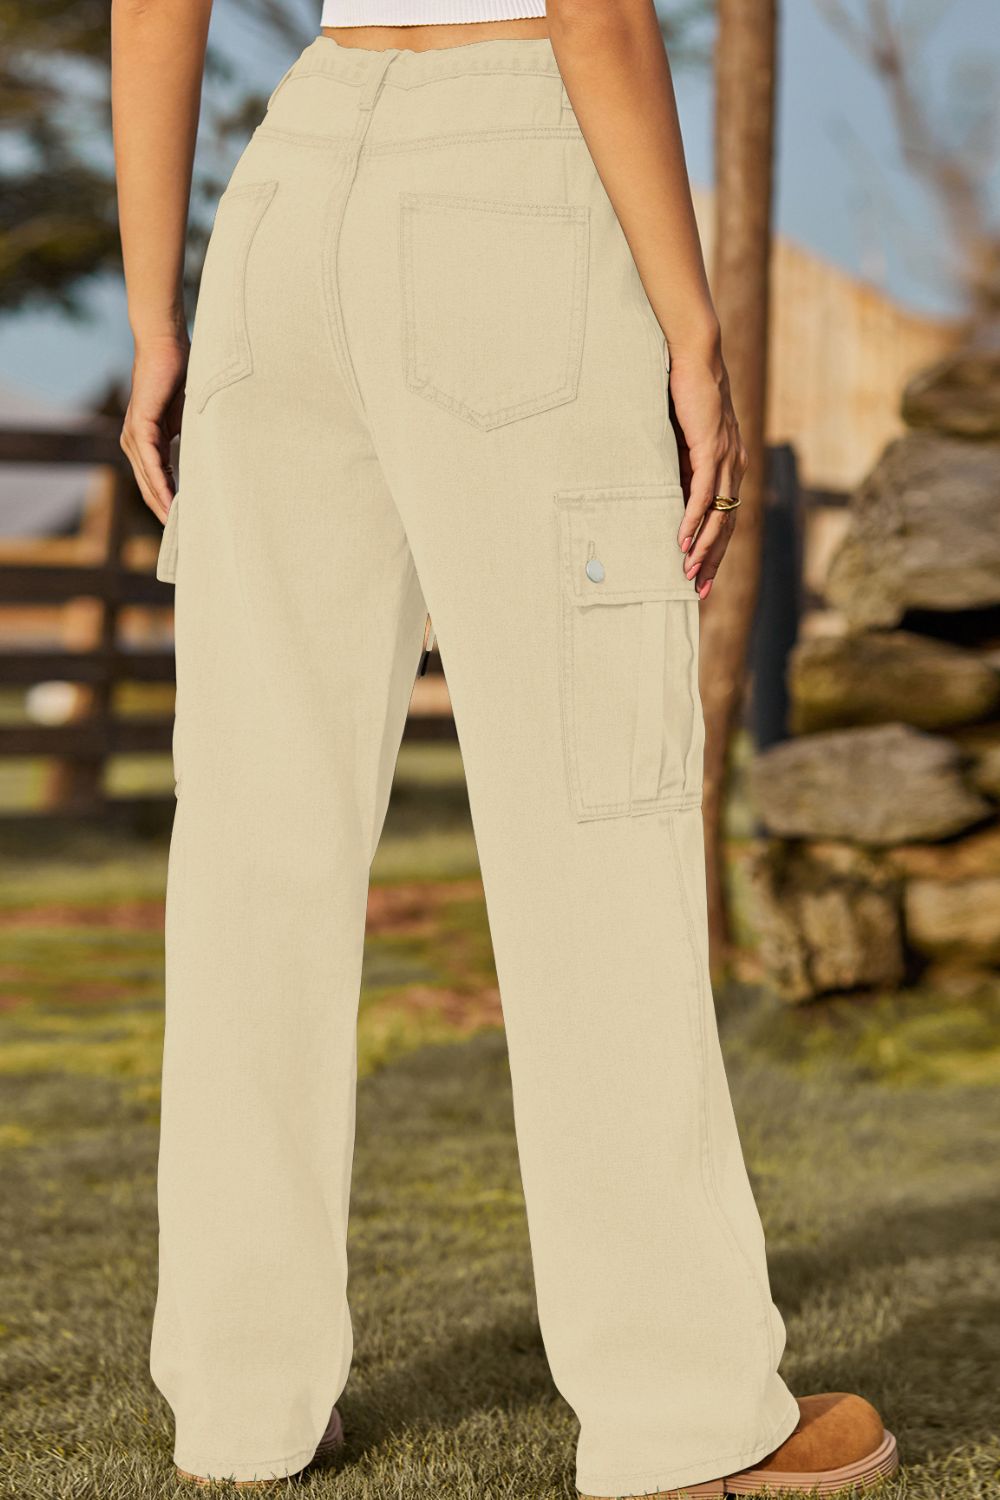 Tan Loose Fit Drawstring Jeans with Pocket Sentient Beauty Fashions Apparel &amp; Accessories